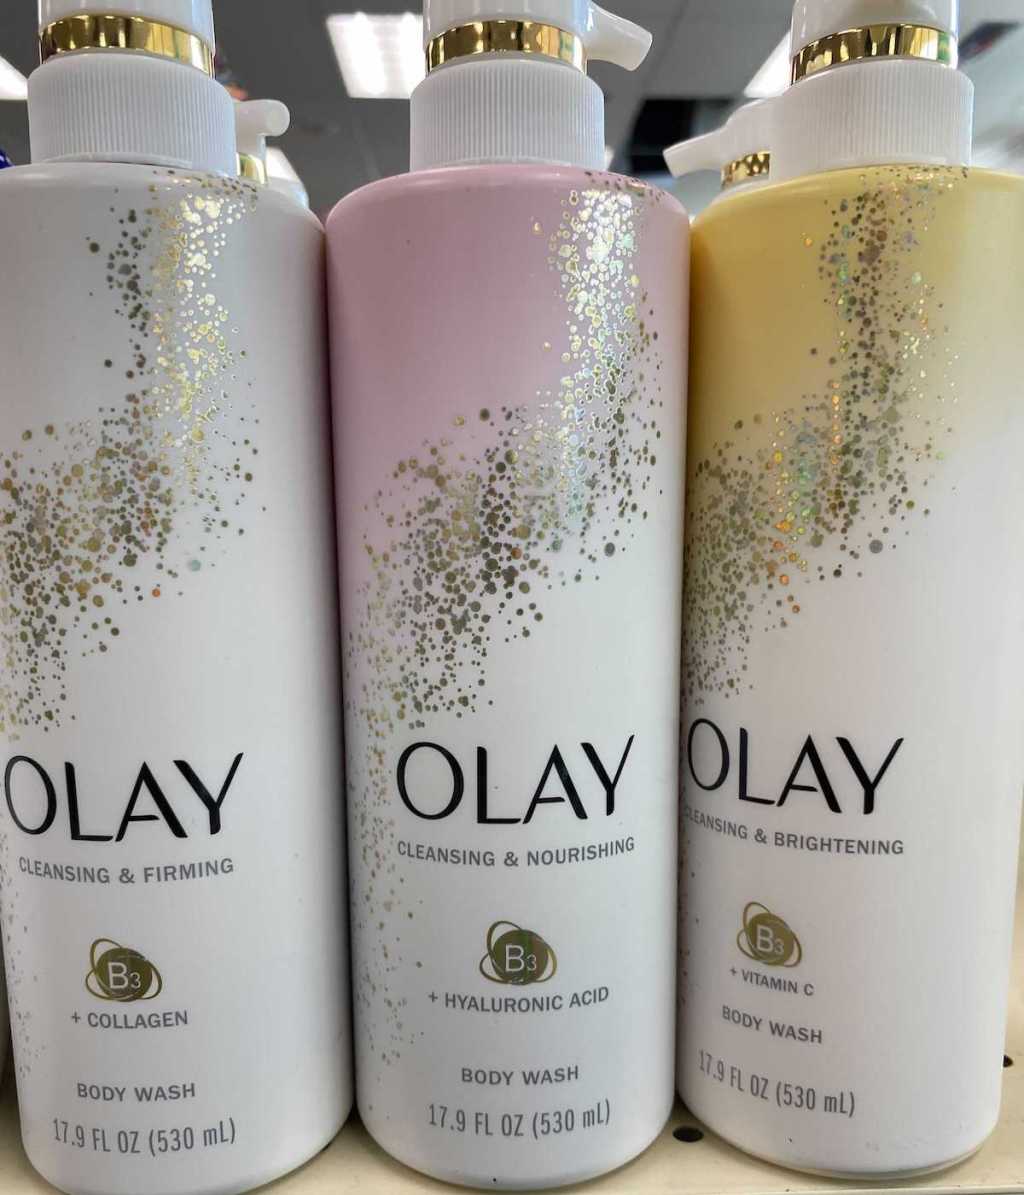 up-to-80-off-olay-body-washes-after-target-gift-cards-rebate-hip2save